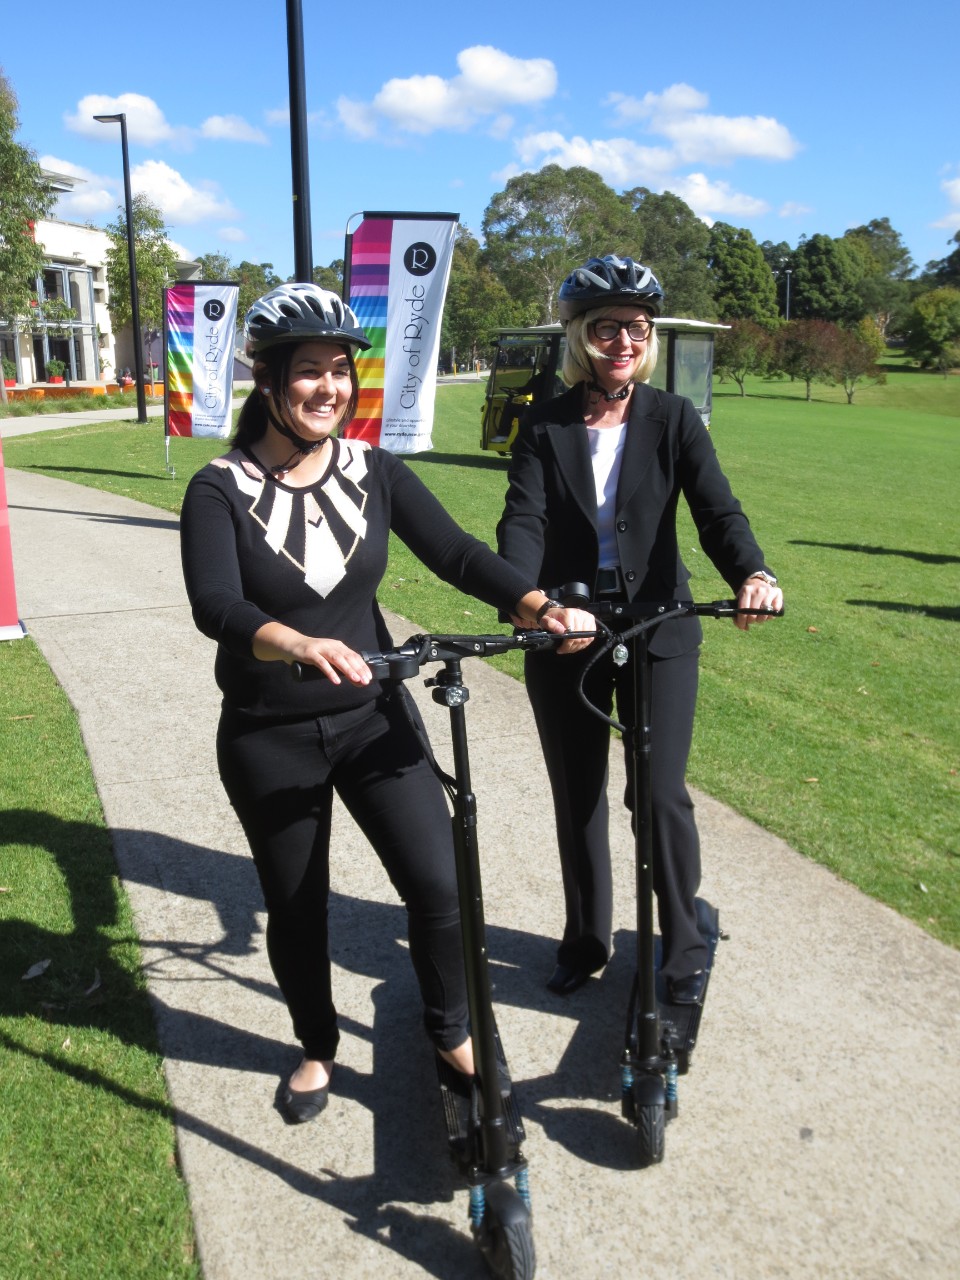 Personal mobility devices, known as PMDs, are more disruptive and a less successful sustainable transport option thus far in Australia. Photo: Professor Robyn Dowling.